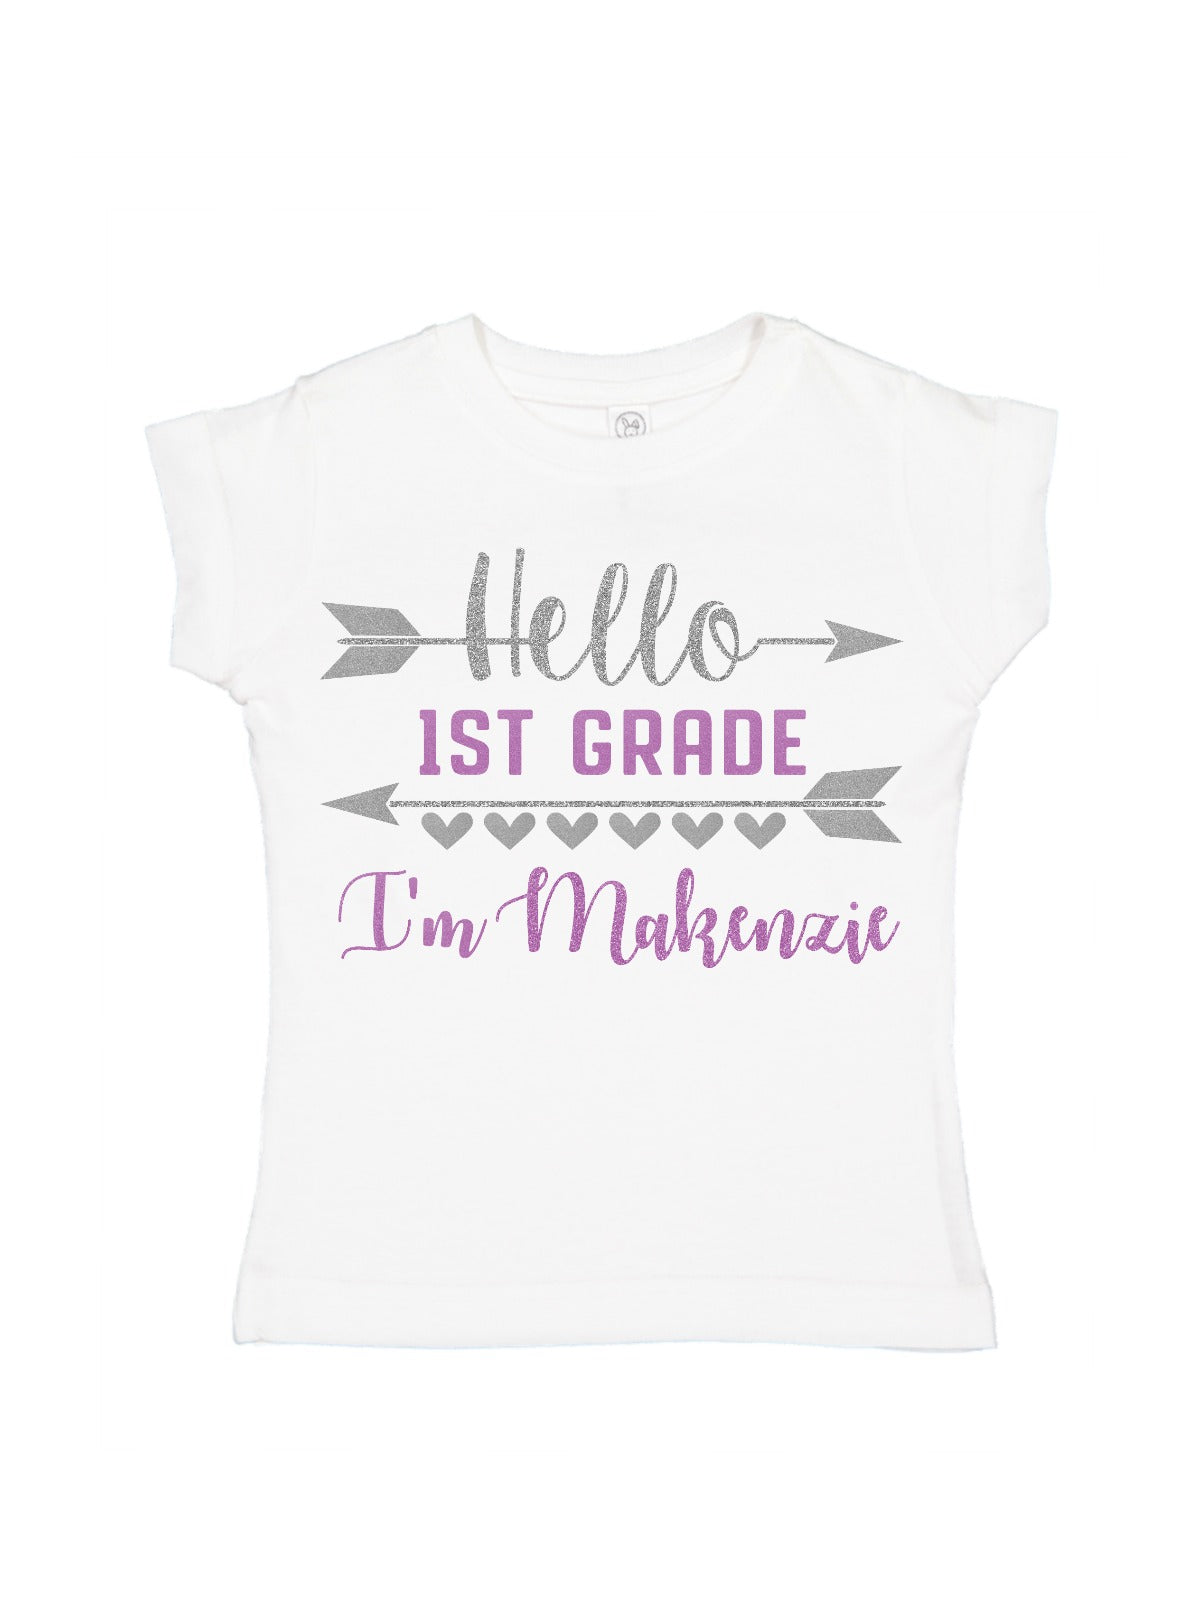 lavender purple and silver personalized first day of school shirt